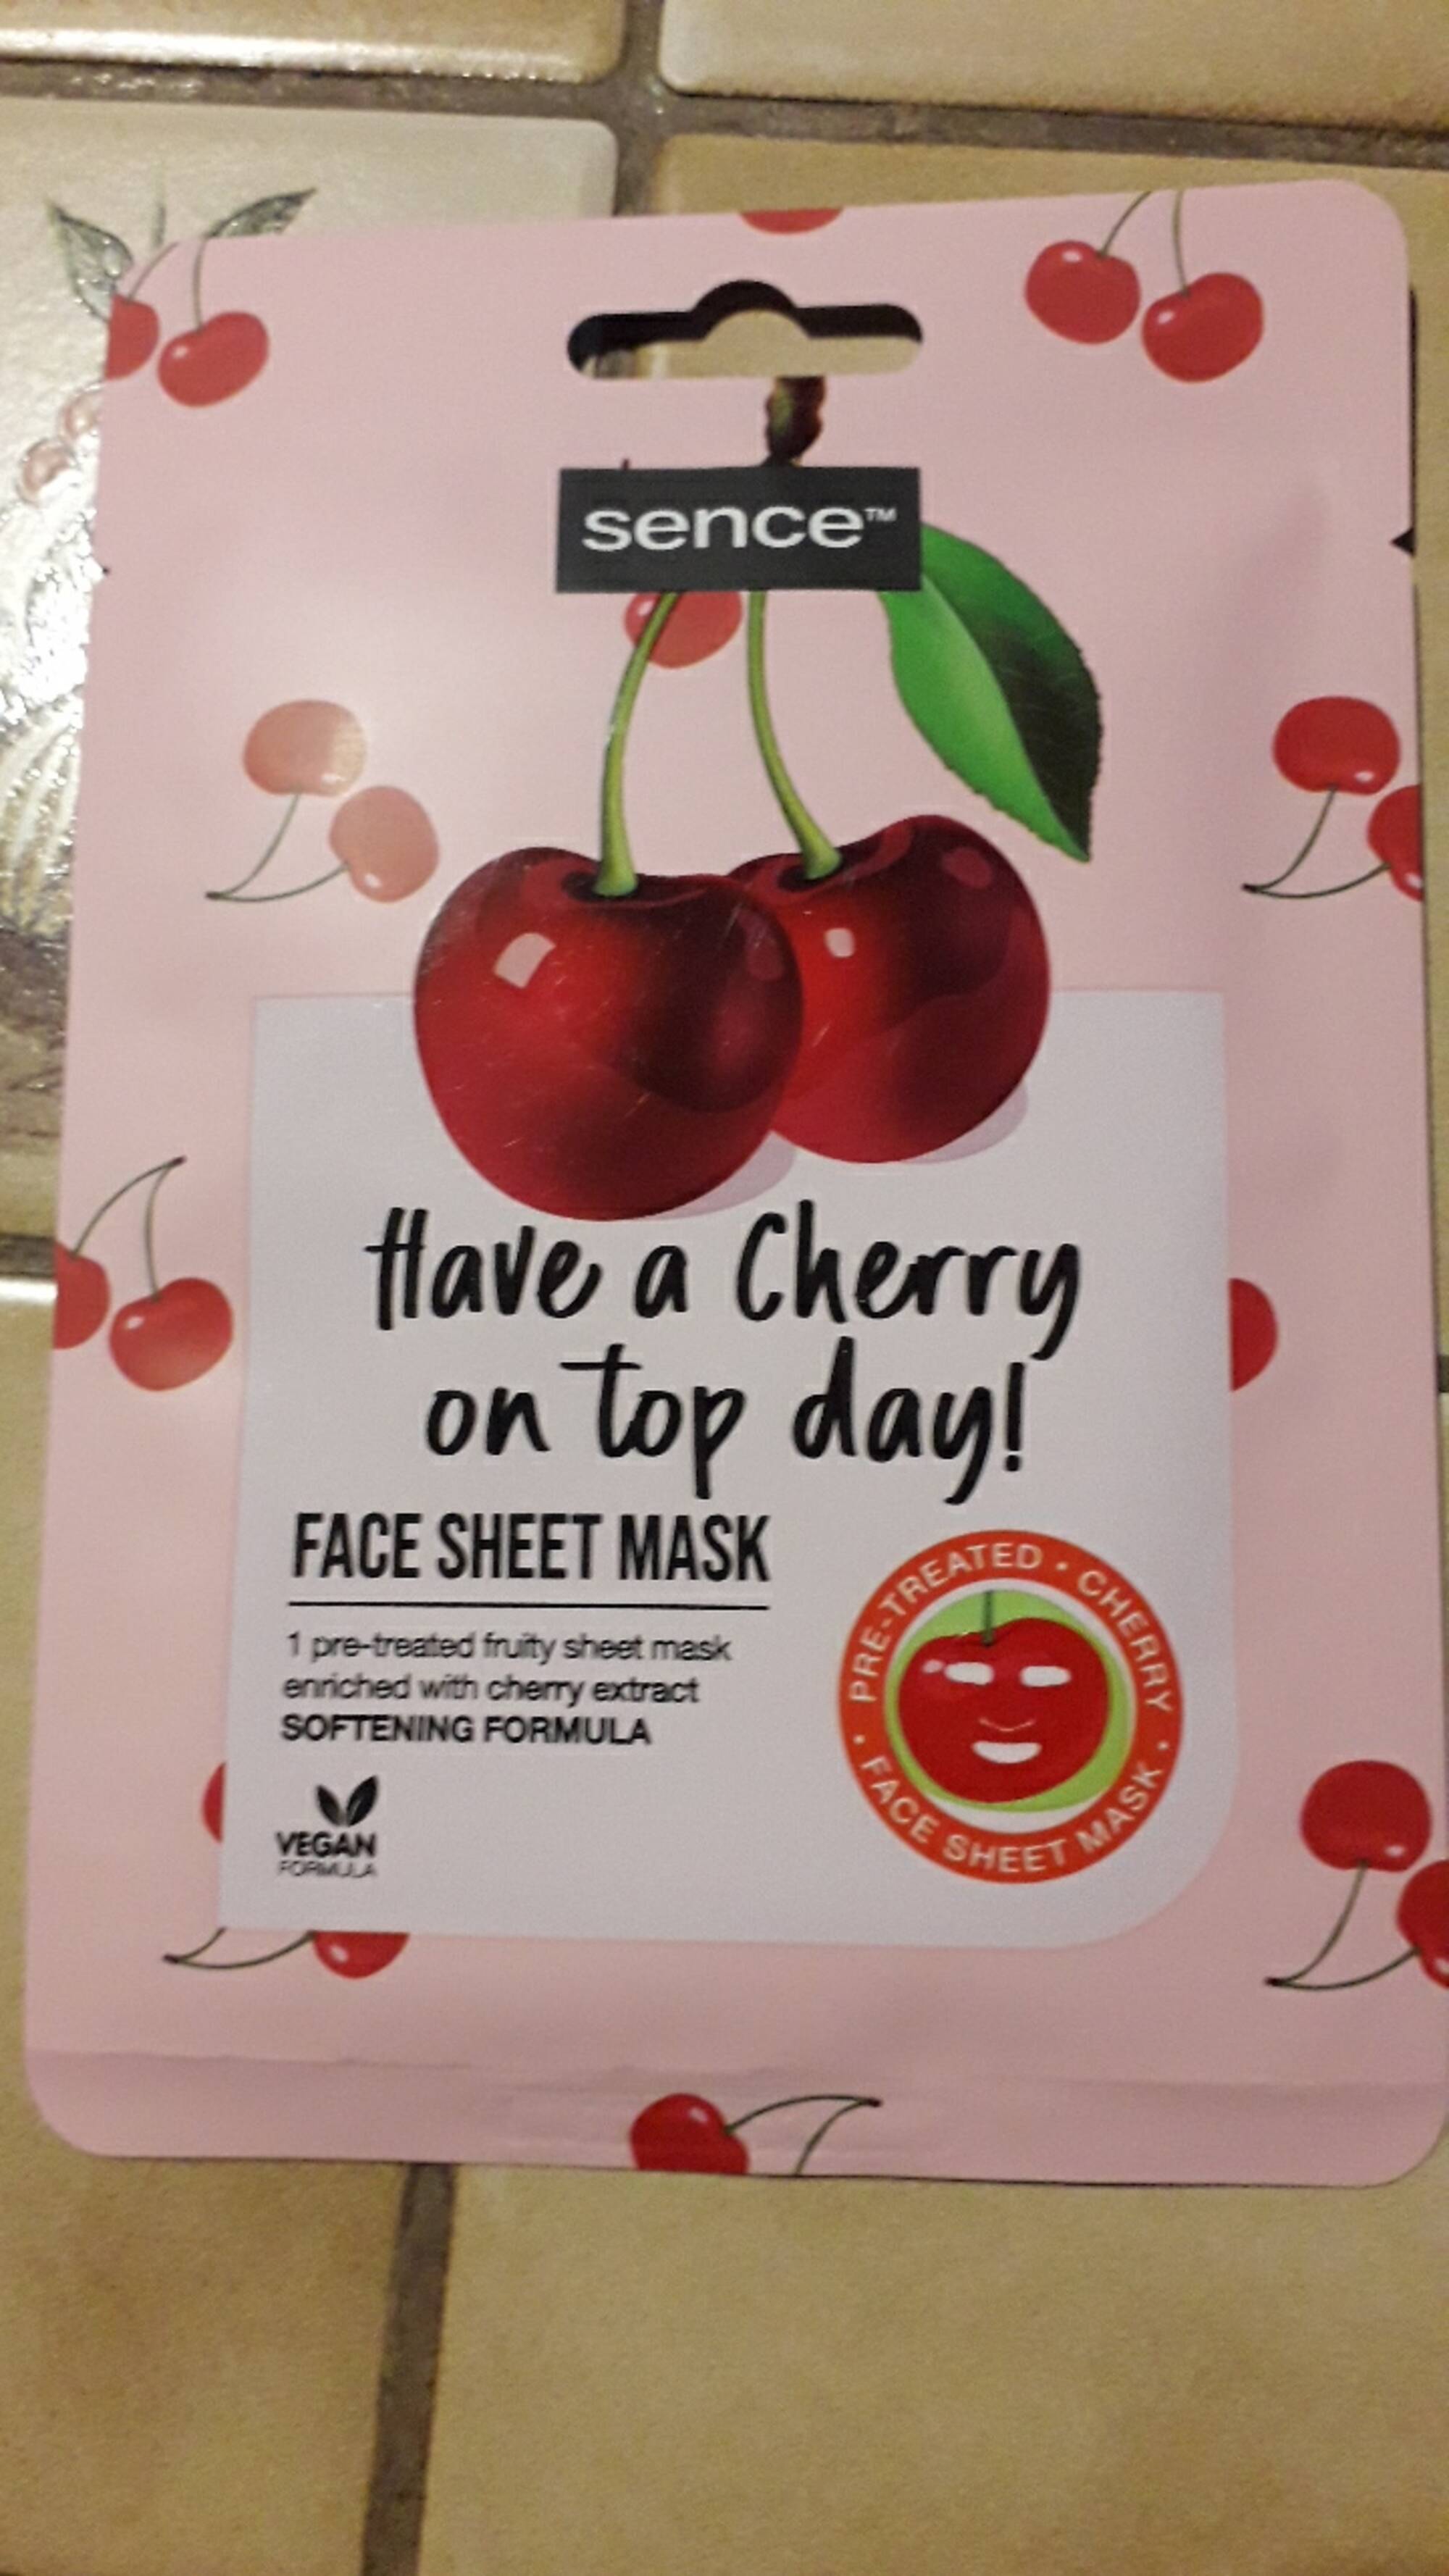 SENCE - Have a cherry on top day! - Face sheet mask